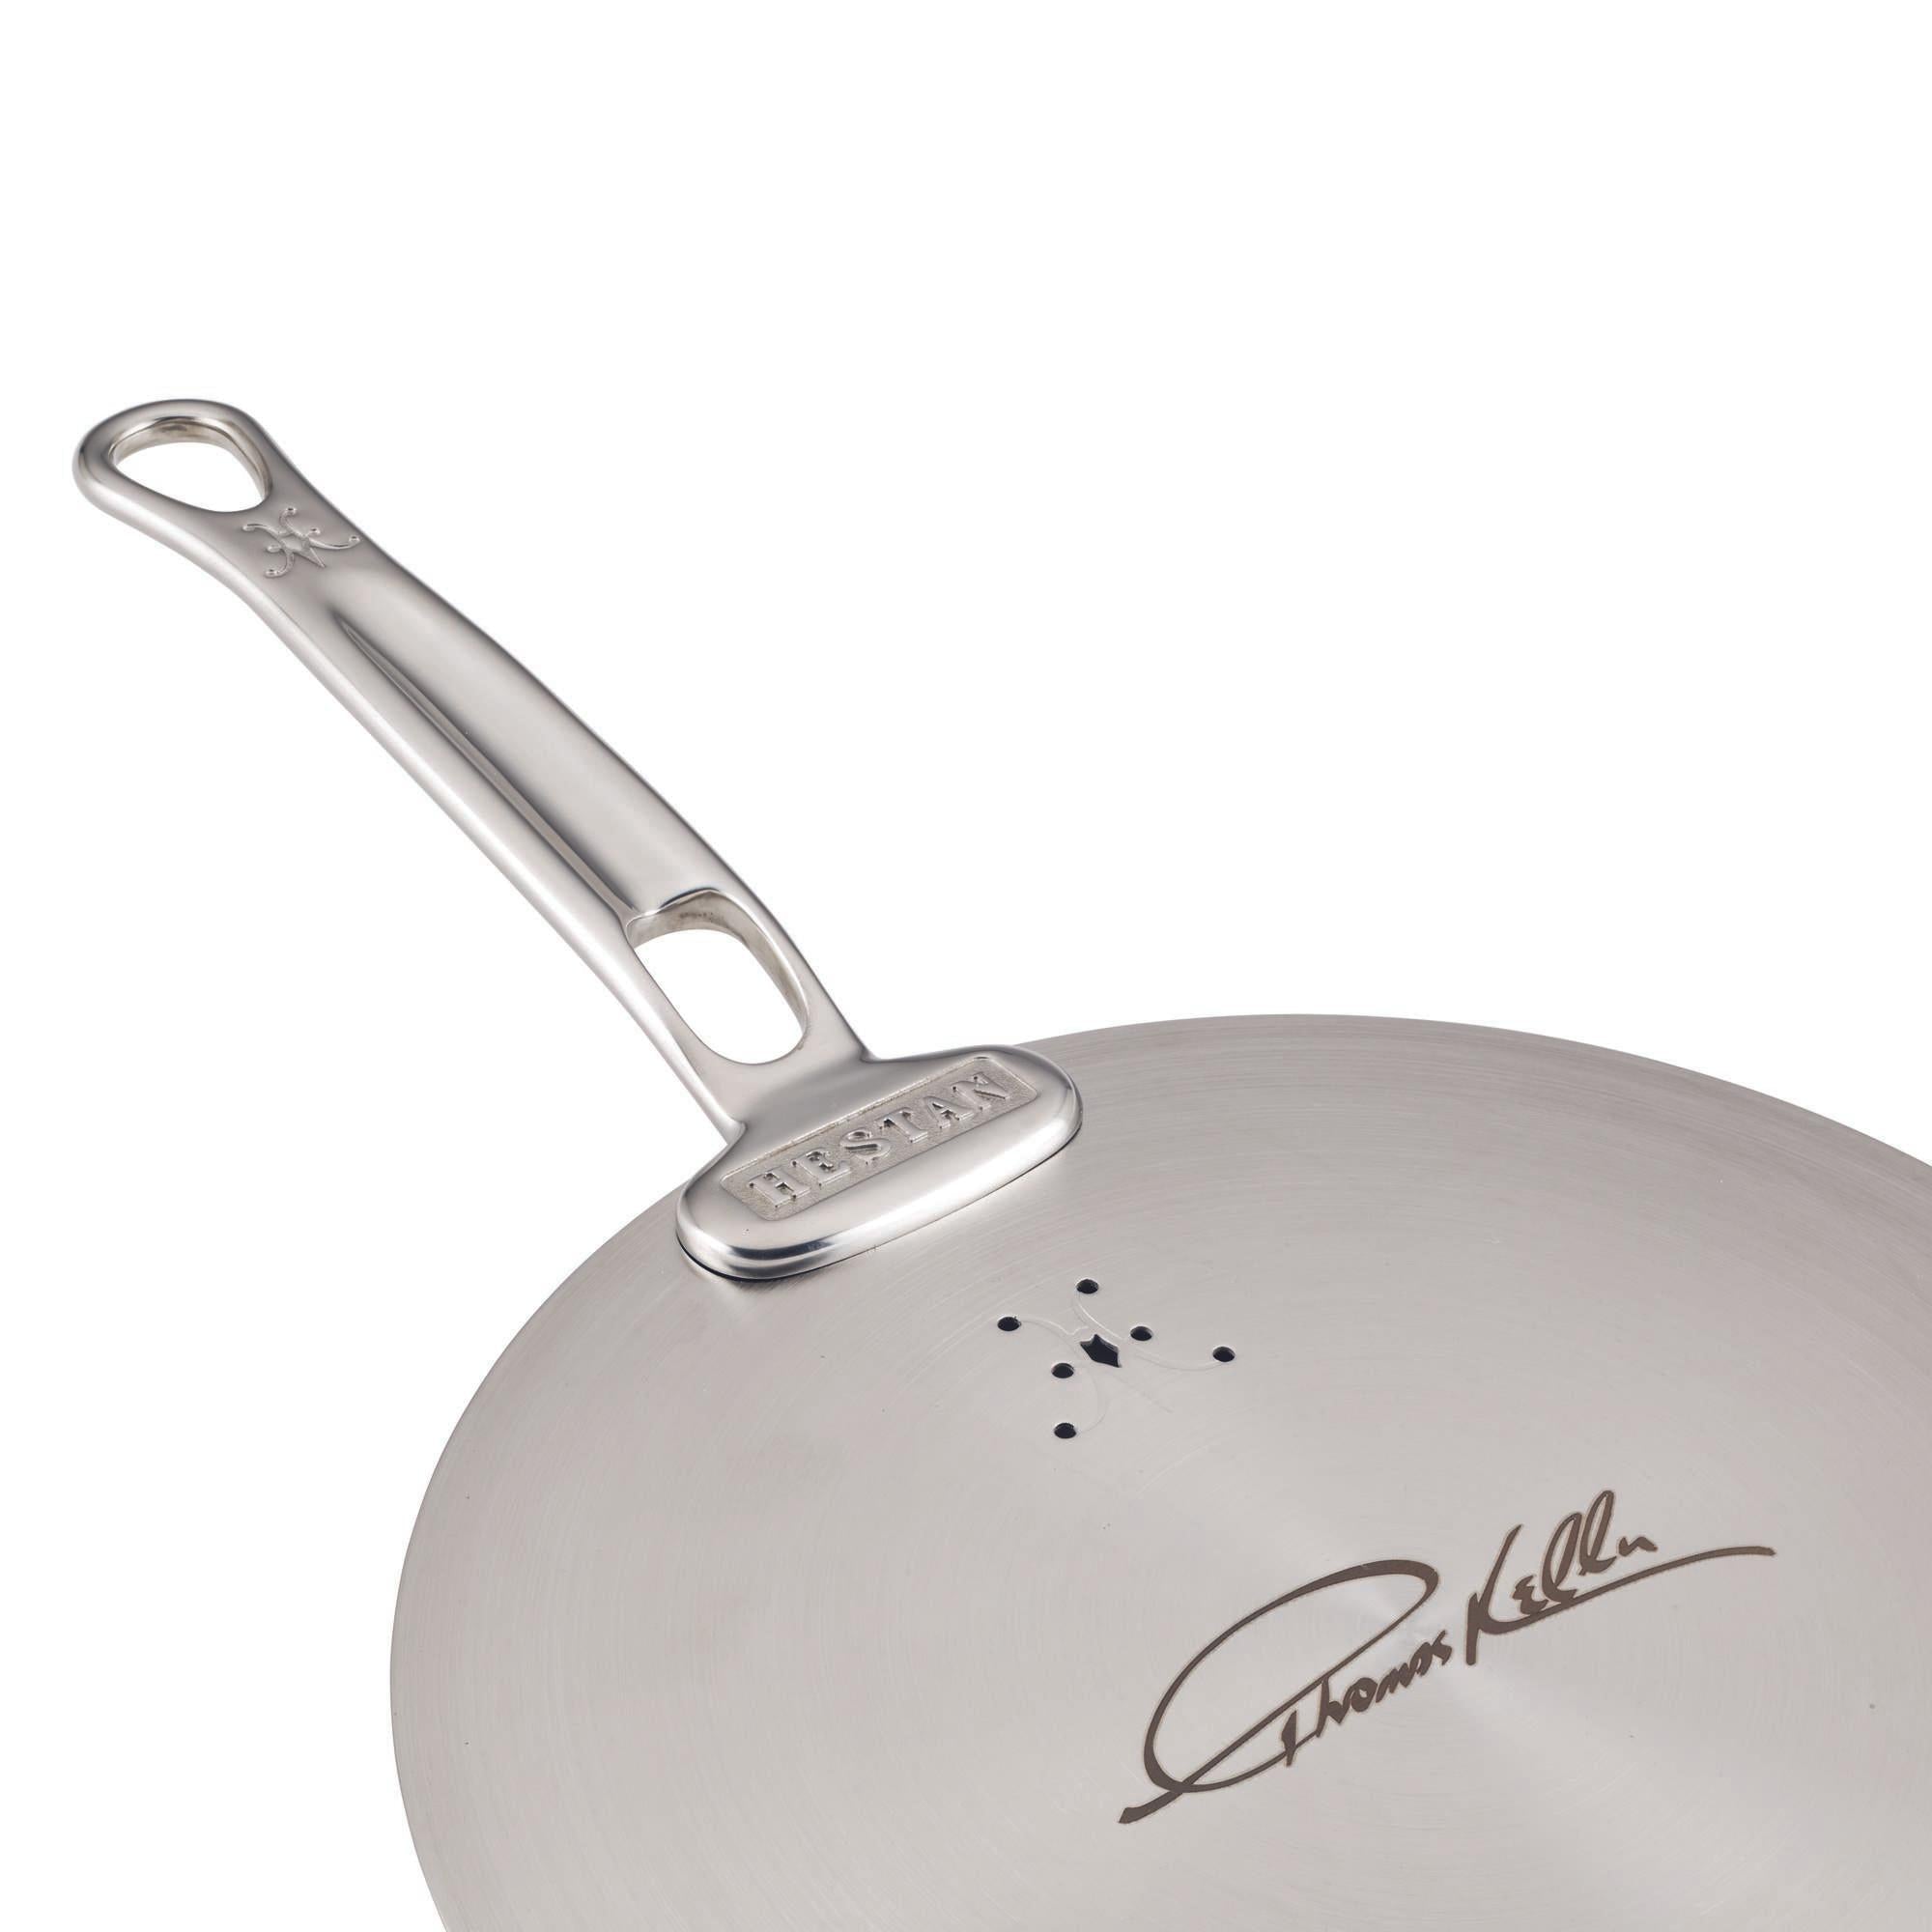 Looking For a Frying Pan With a Lid: A universal lid for all your pots and